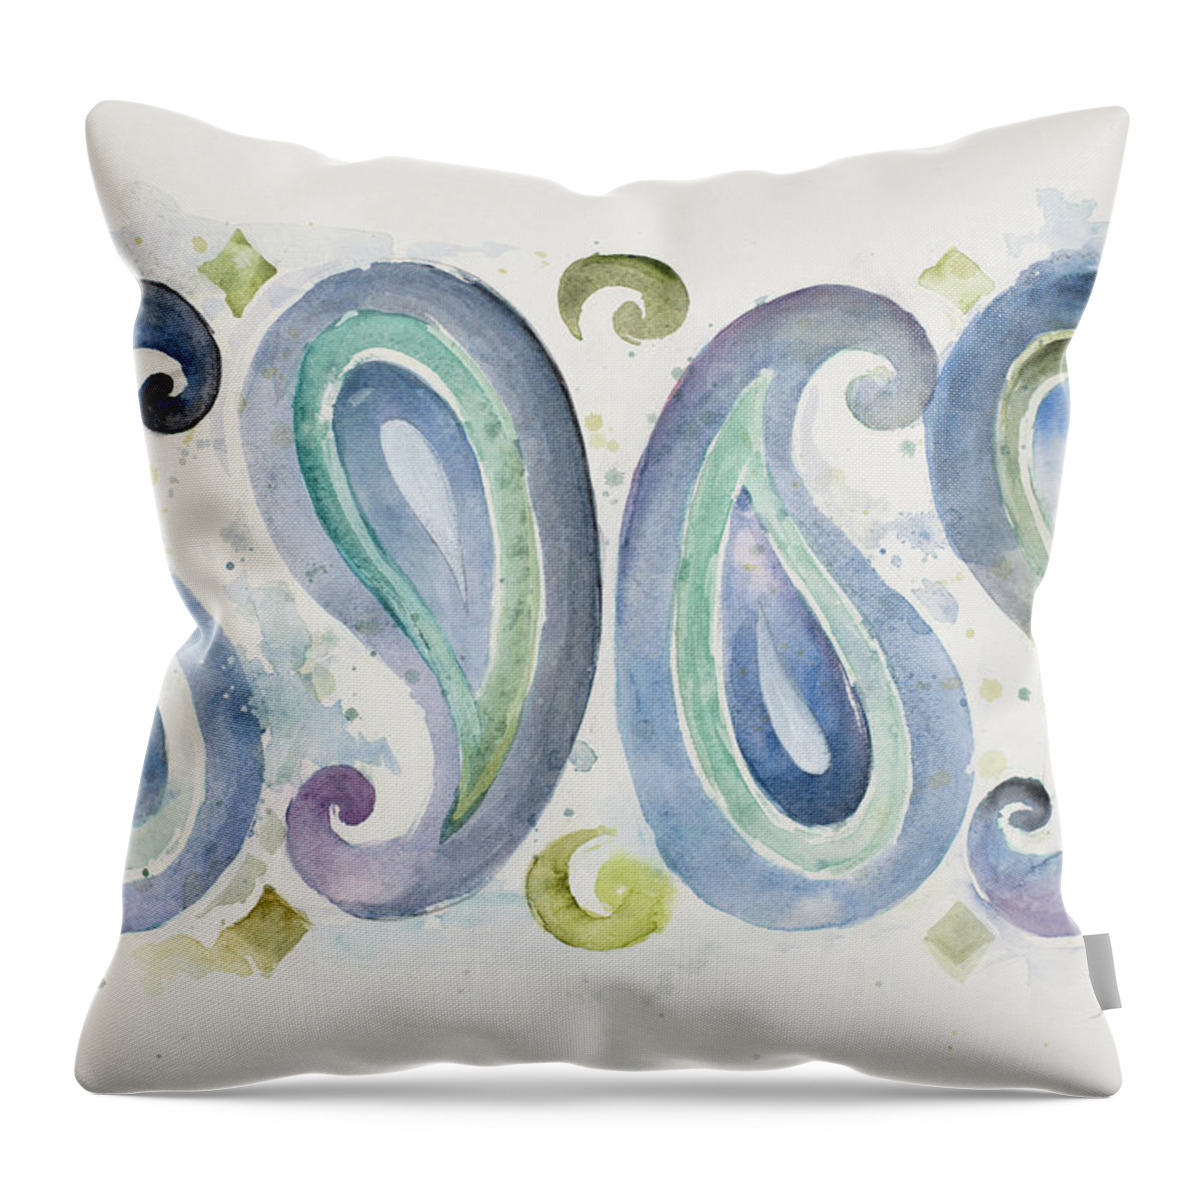 Paisley Throw Pillow featuring the digital art Paisley Design by Patricia Pinto